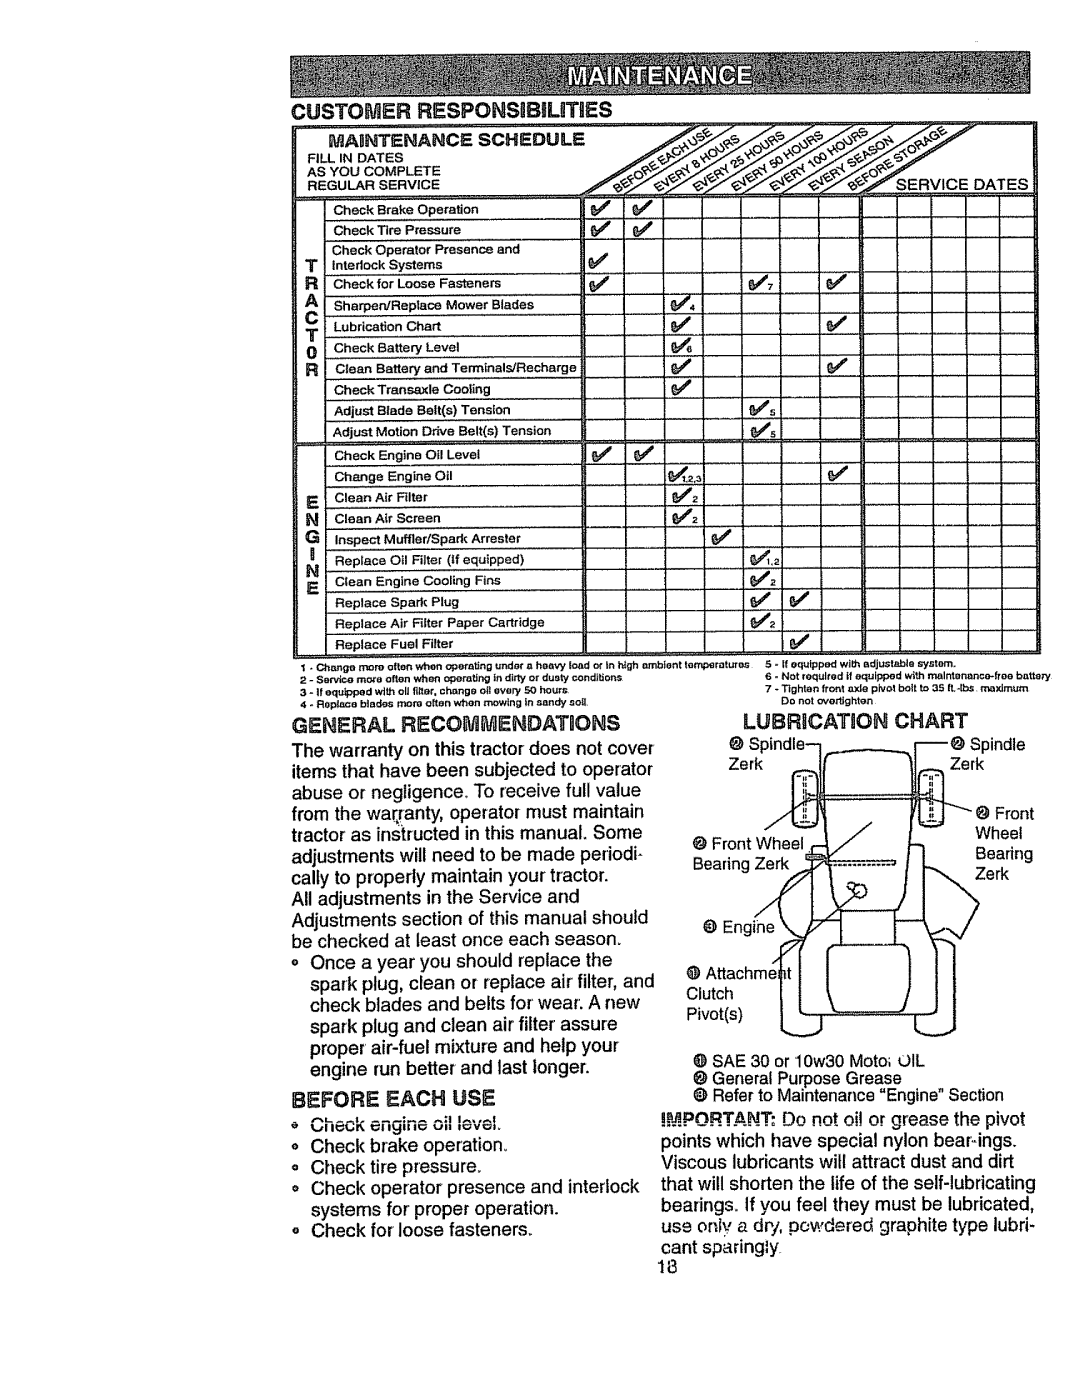 Craftsman 917270841 Before Each Use, LUBRiCATiON, Chart, Lubri=_0nCa, A S.,_RoplsceMoworBlades, €iea,Ai, Front, Wheel 